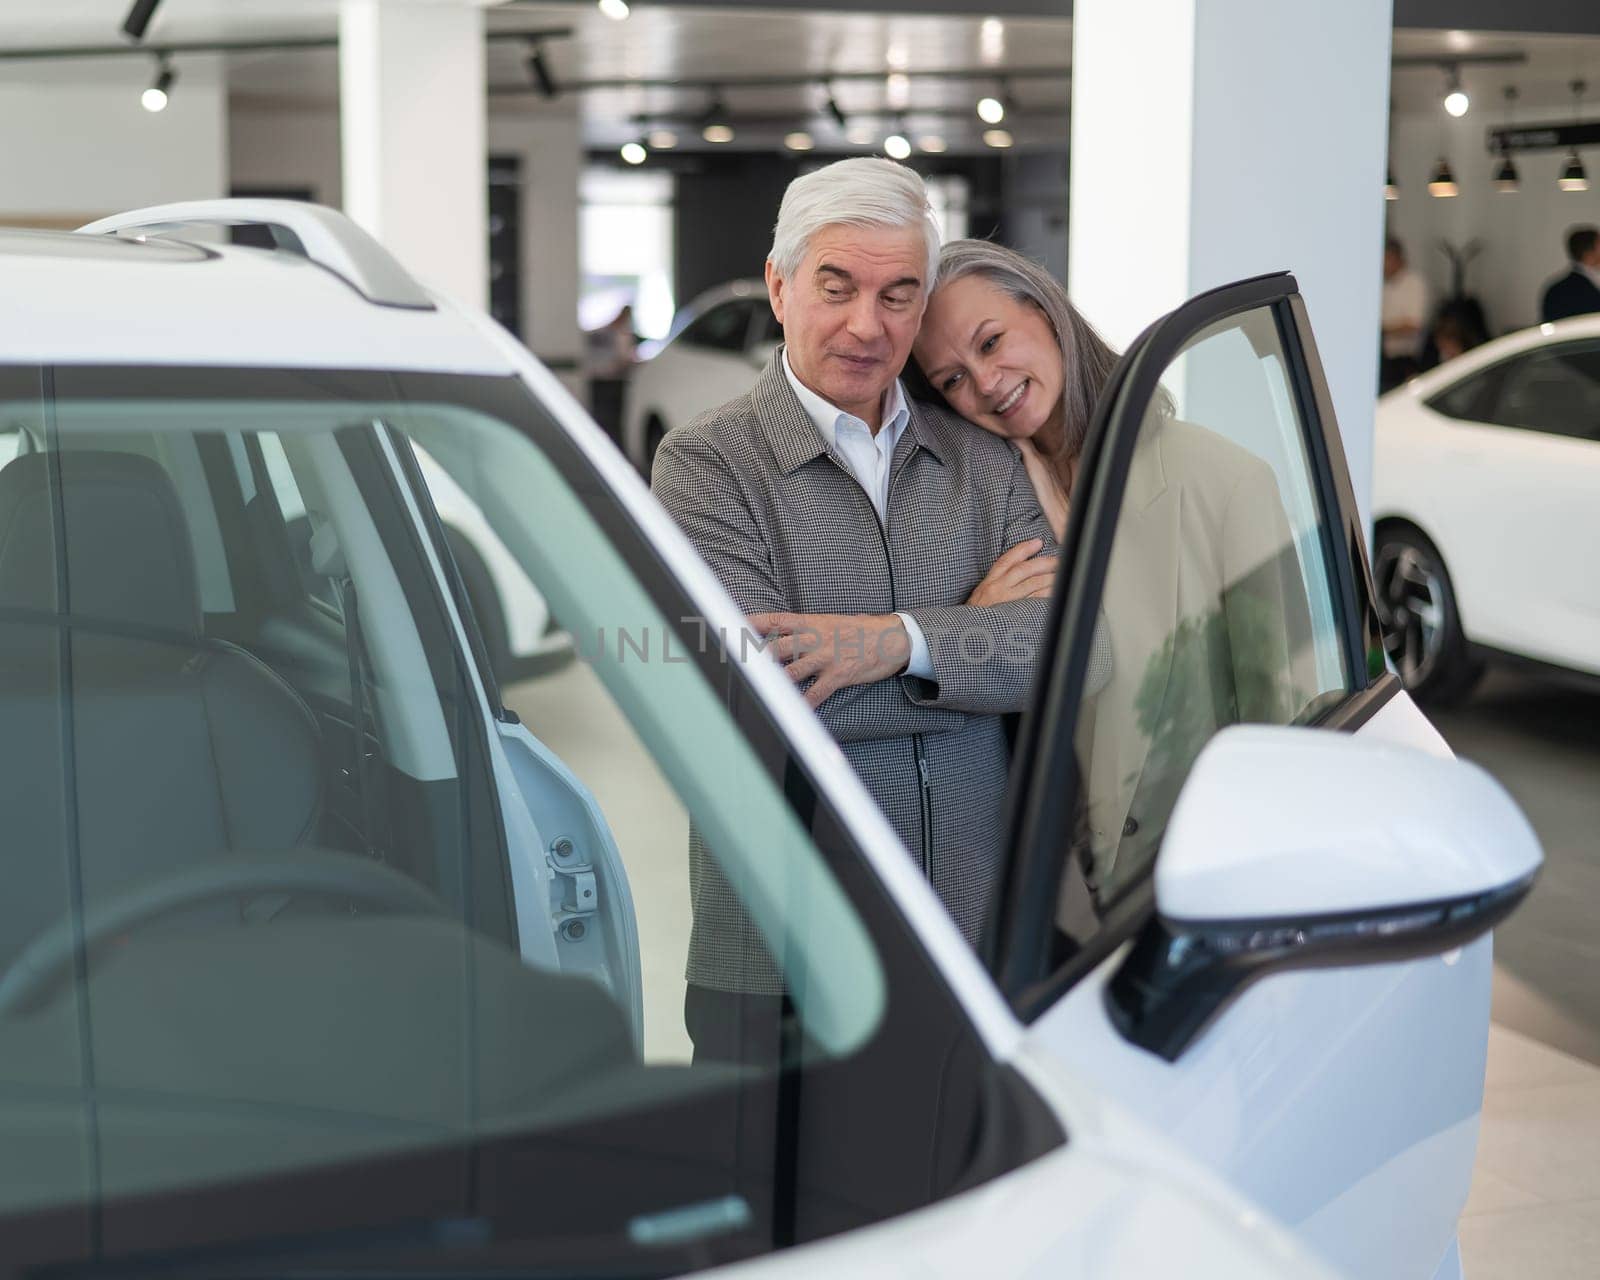 An elderly Caucasian couple chooses a new car at a car dealership. by mrwed54